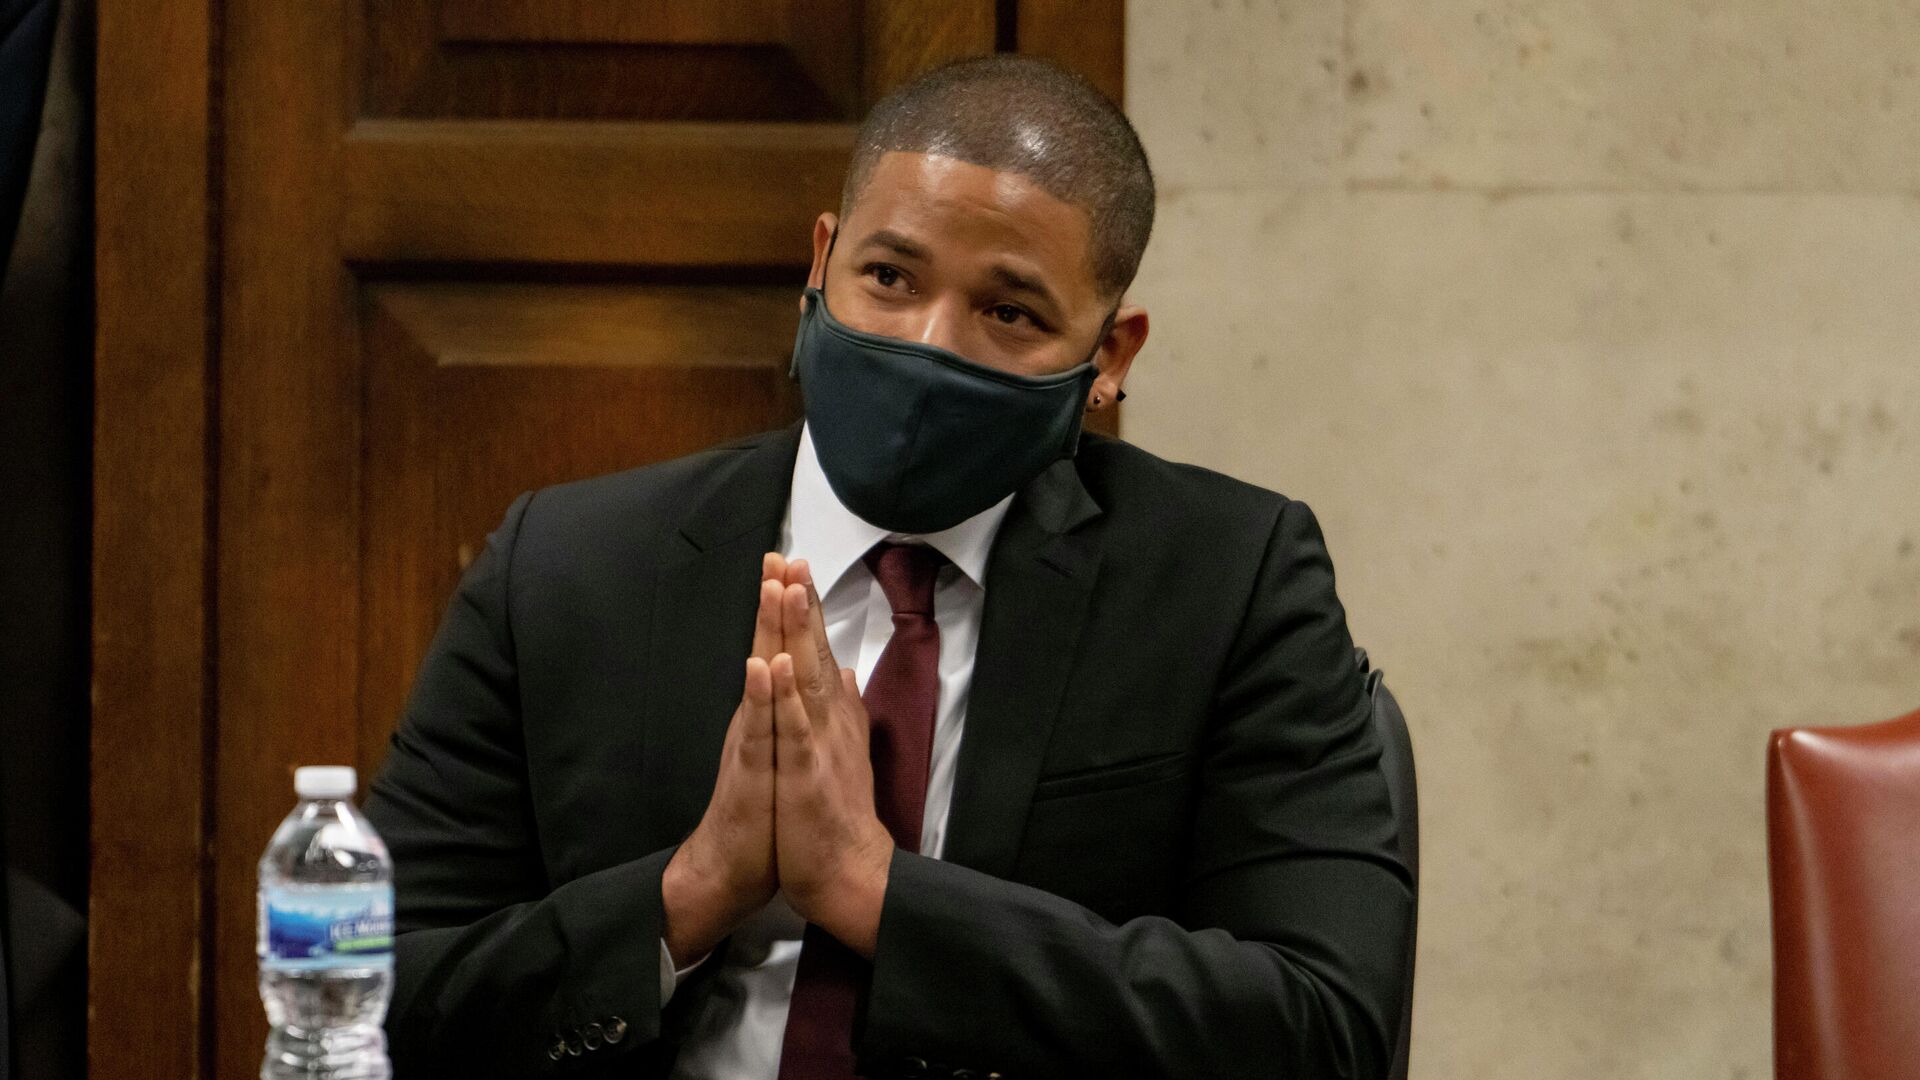 Actor Jussie Smollett listens as his grandmother Molly testifies at his sentencing hearing at the Leighton Criminal Court Building, Thursday, March 10, 2022, in Chicago. - Sputnik International, 1920, 11.03.2022